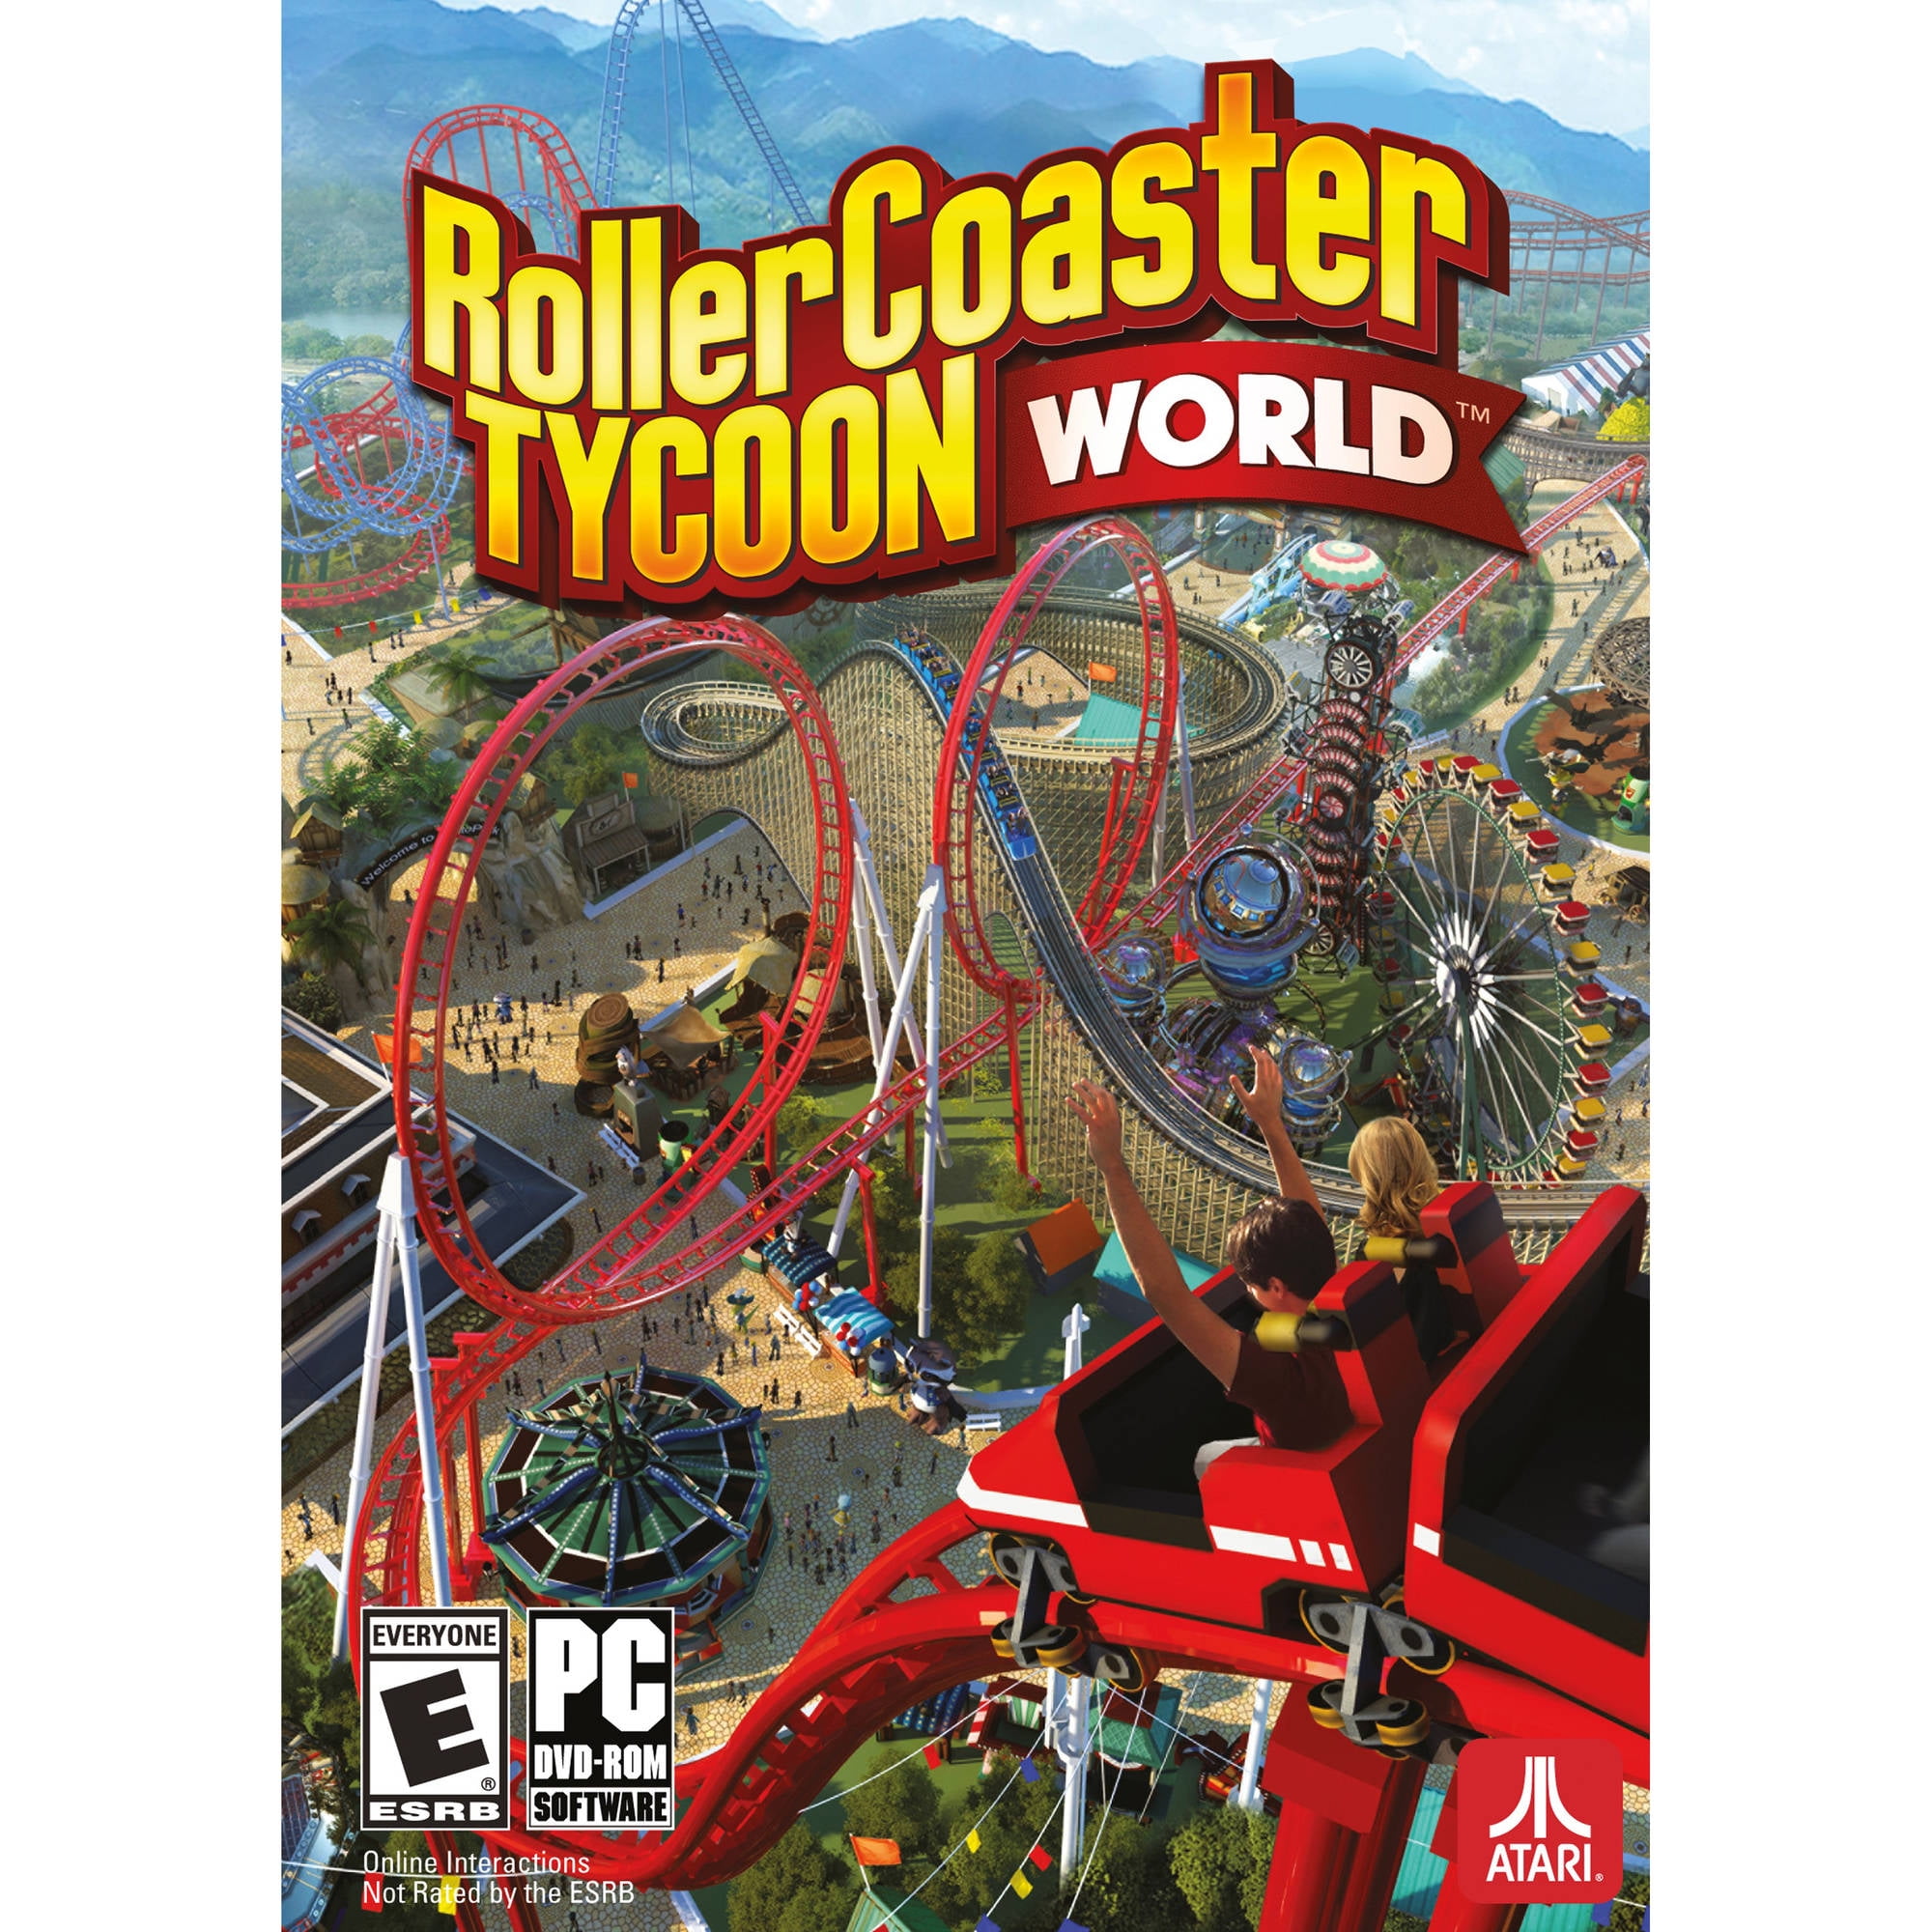 Download & Play RollerCoaster Tycoon Classic on PC & Mac